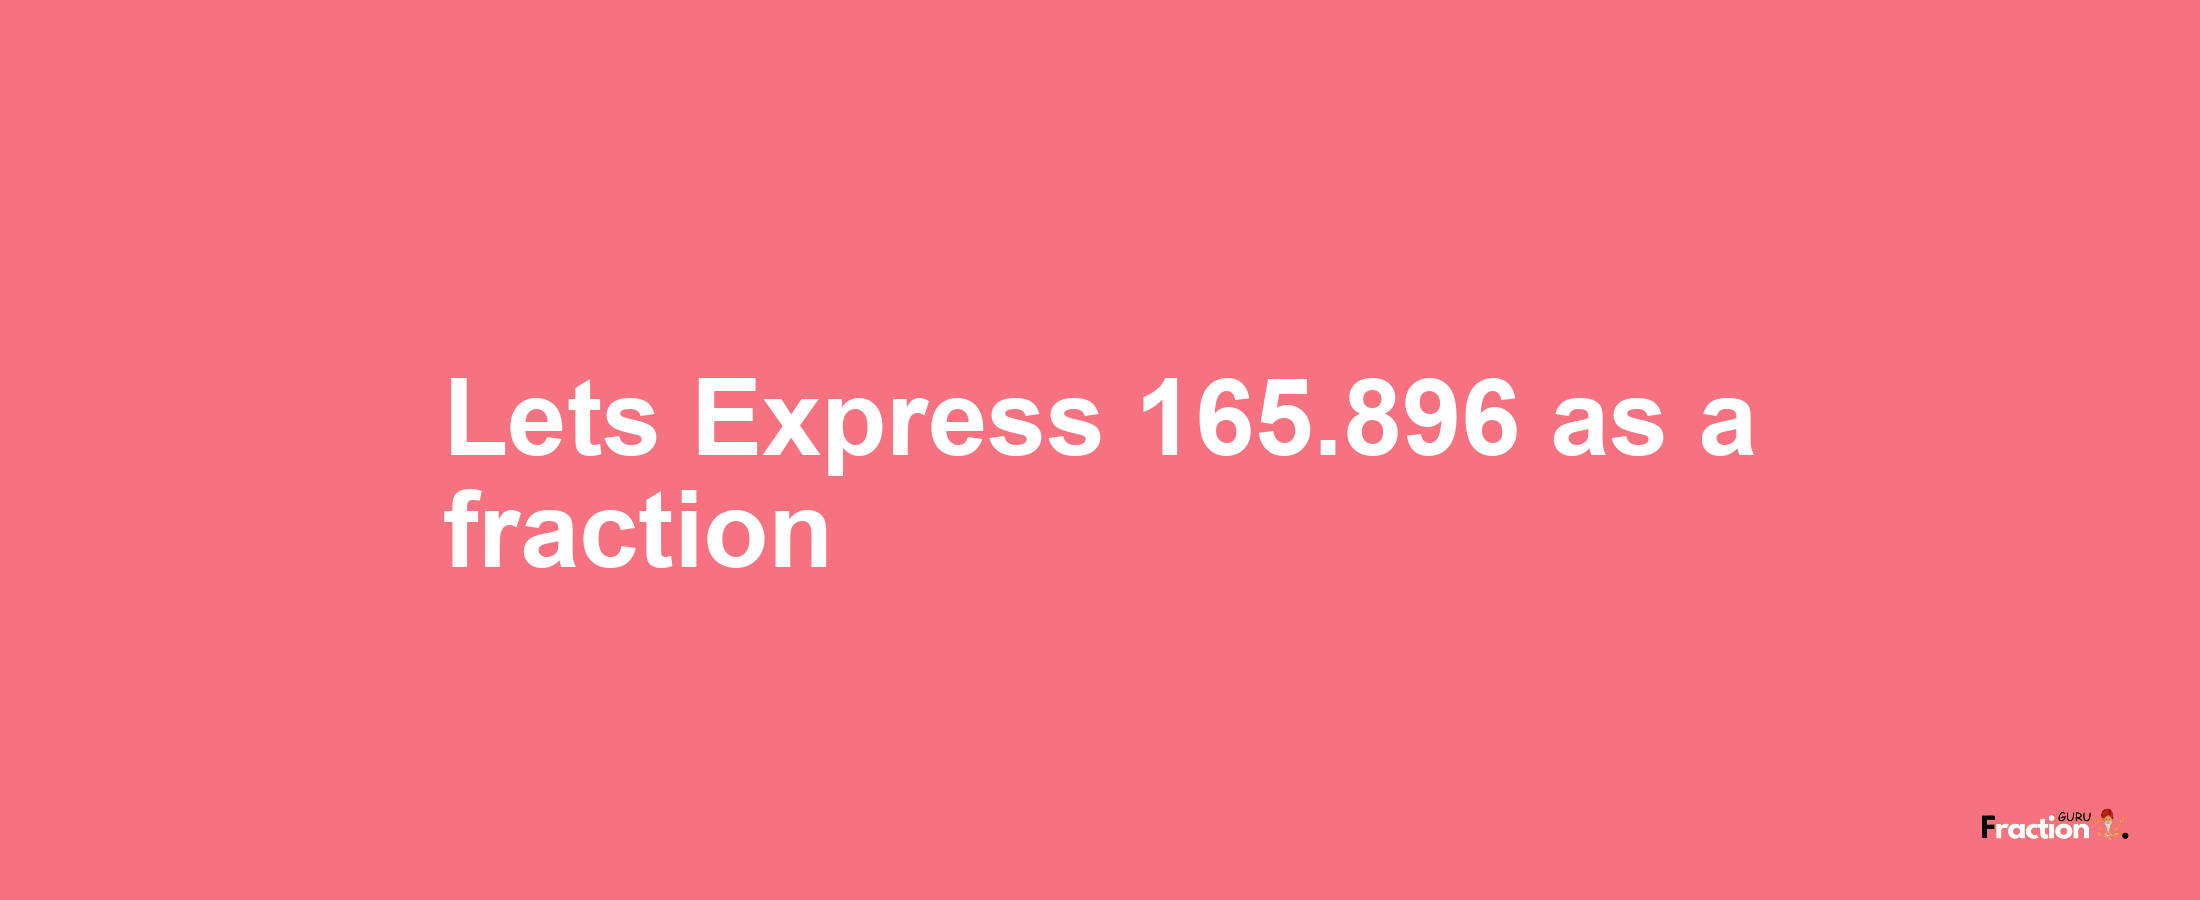 Lets Express 165.896 as afraction